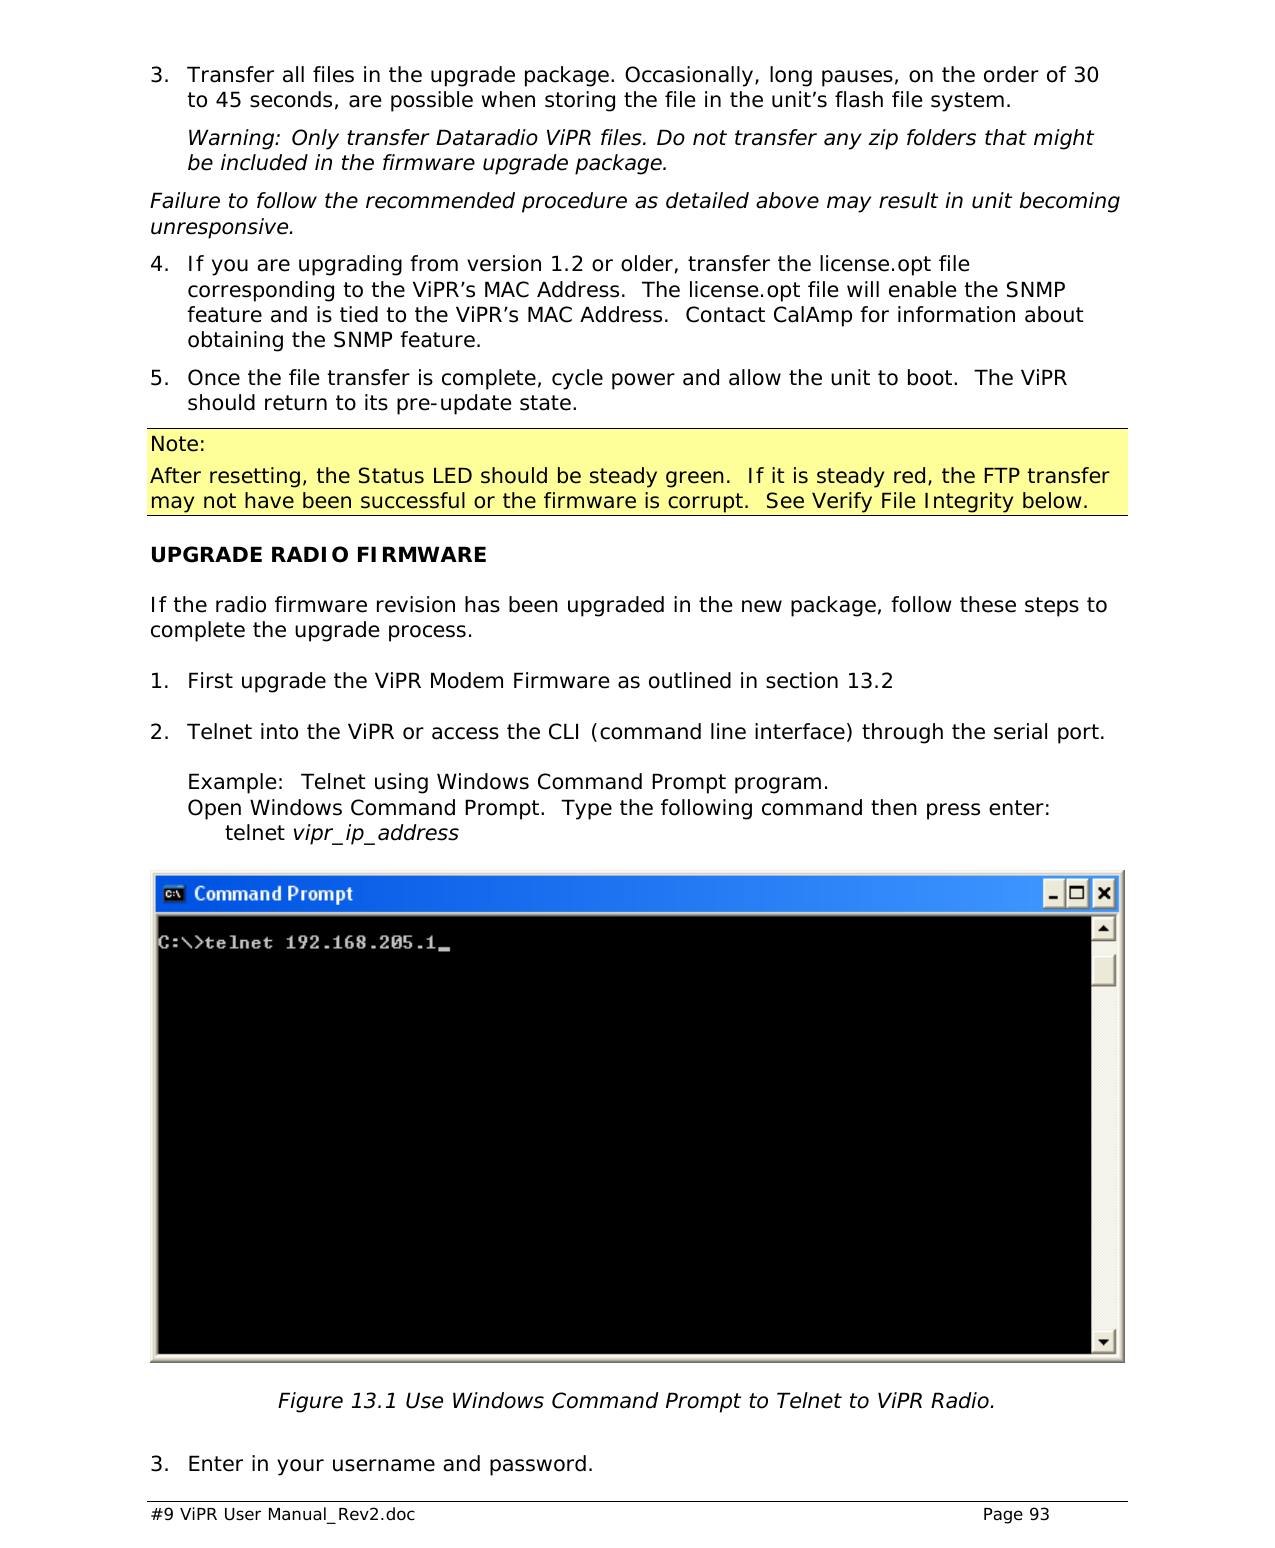  #9 ViPR User Manual_Rev2.doc    Page 93  3. Transfer all files in the upgrade package. Occasionally, long pauses, on the order of 30 to 45 seconds, are possible when storing the file in the unit’s flash file system.  Warning: Only transfer Dataradio ViPR files. Do not transfer any zip folders that might be included in the firmware upgrade package. Failure to follow the recommended procedure as detailed above may result in unit becoming unresponsive. 4. If you are upgrading from version 1.2 or older, transfer the license.opt file corresponding to the ViPR’s MAC Address.  The license.opt file will enable the SNMP feature and is tied to the ViPR’s MAC Address.  Contact CalAmp for information about obtaining the SNMP feature. 5. Once the file transfer is complete, cycle power and allow the unit to boot.  The ViPR should return to its pre-update state.  Note: After resetting, the Status LED should be steady green.  If it is steady red, the FTP transfer may not have been successful or the firmware is corrupt.  See Verify File Integrity below. UPGRADE RADIO FIRMWARE If the radio firmware revision has been upgraded in the new package, follow these steps to complete the upgrade process.  1.  First upgrade the ViPR Modem Firmware as outlined in section 13.2  2.   Telnet into the ViPR or access the CLI (command line interface) through the serial port.    Example:  Telnet using Windows Command Prompt program. Open Windows Command Prompt.  Type the following command then press enter:  telnet vipr_ip_address   Figure 13.1 Use Windows Command Prompt to Telnet to ViPR Radio.  3.  Enter in your username and password. 